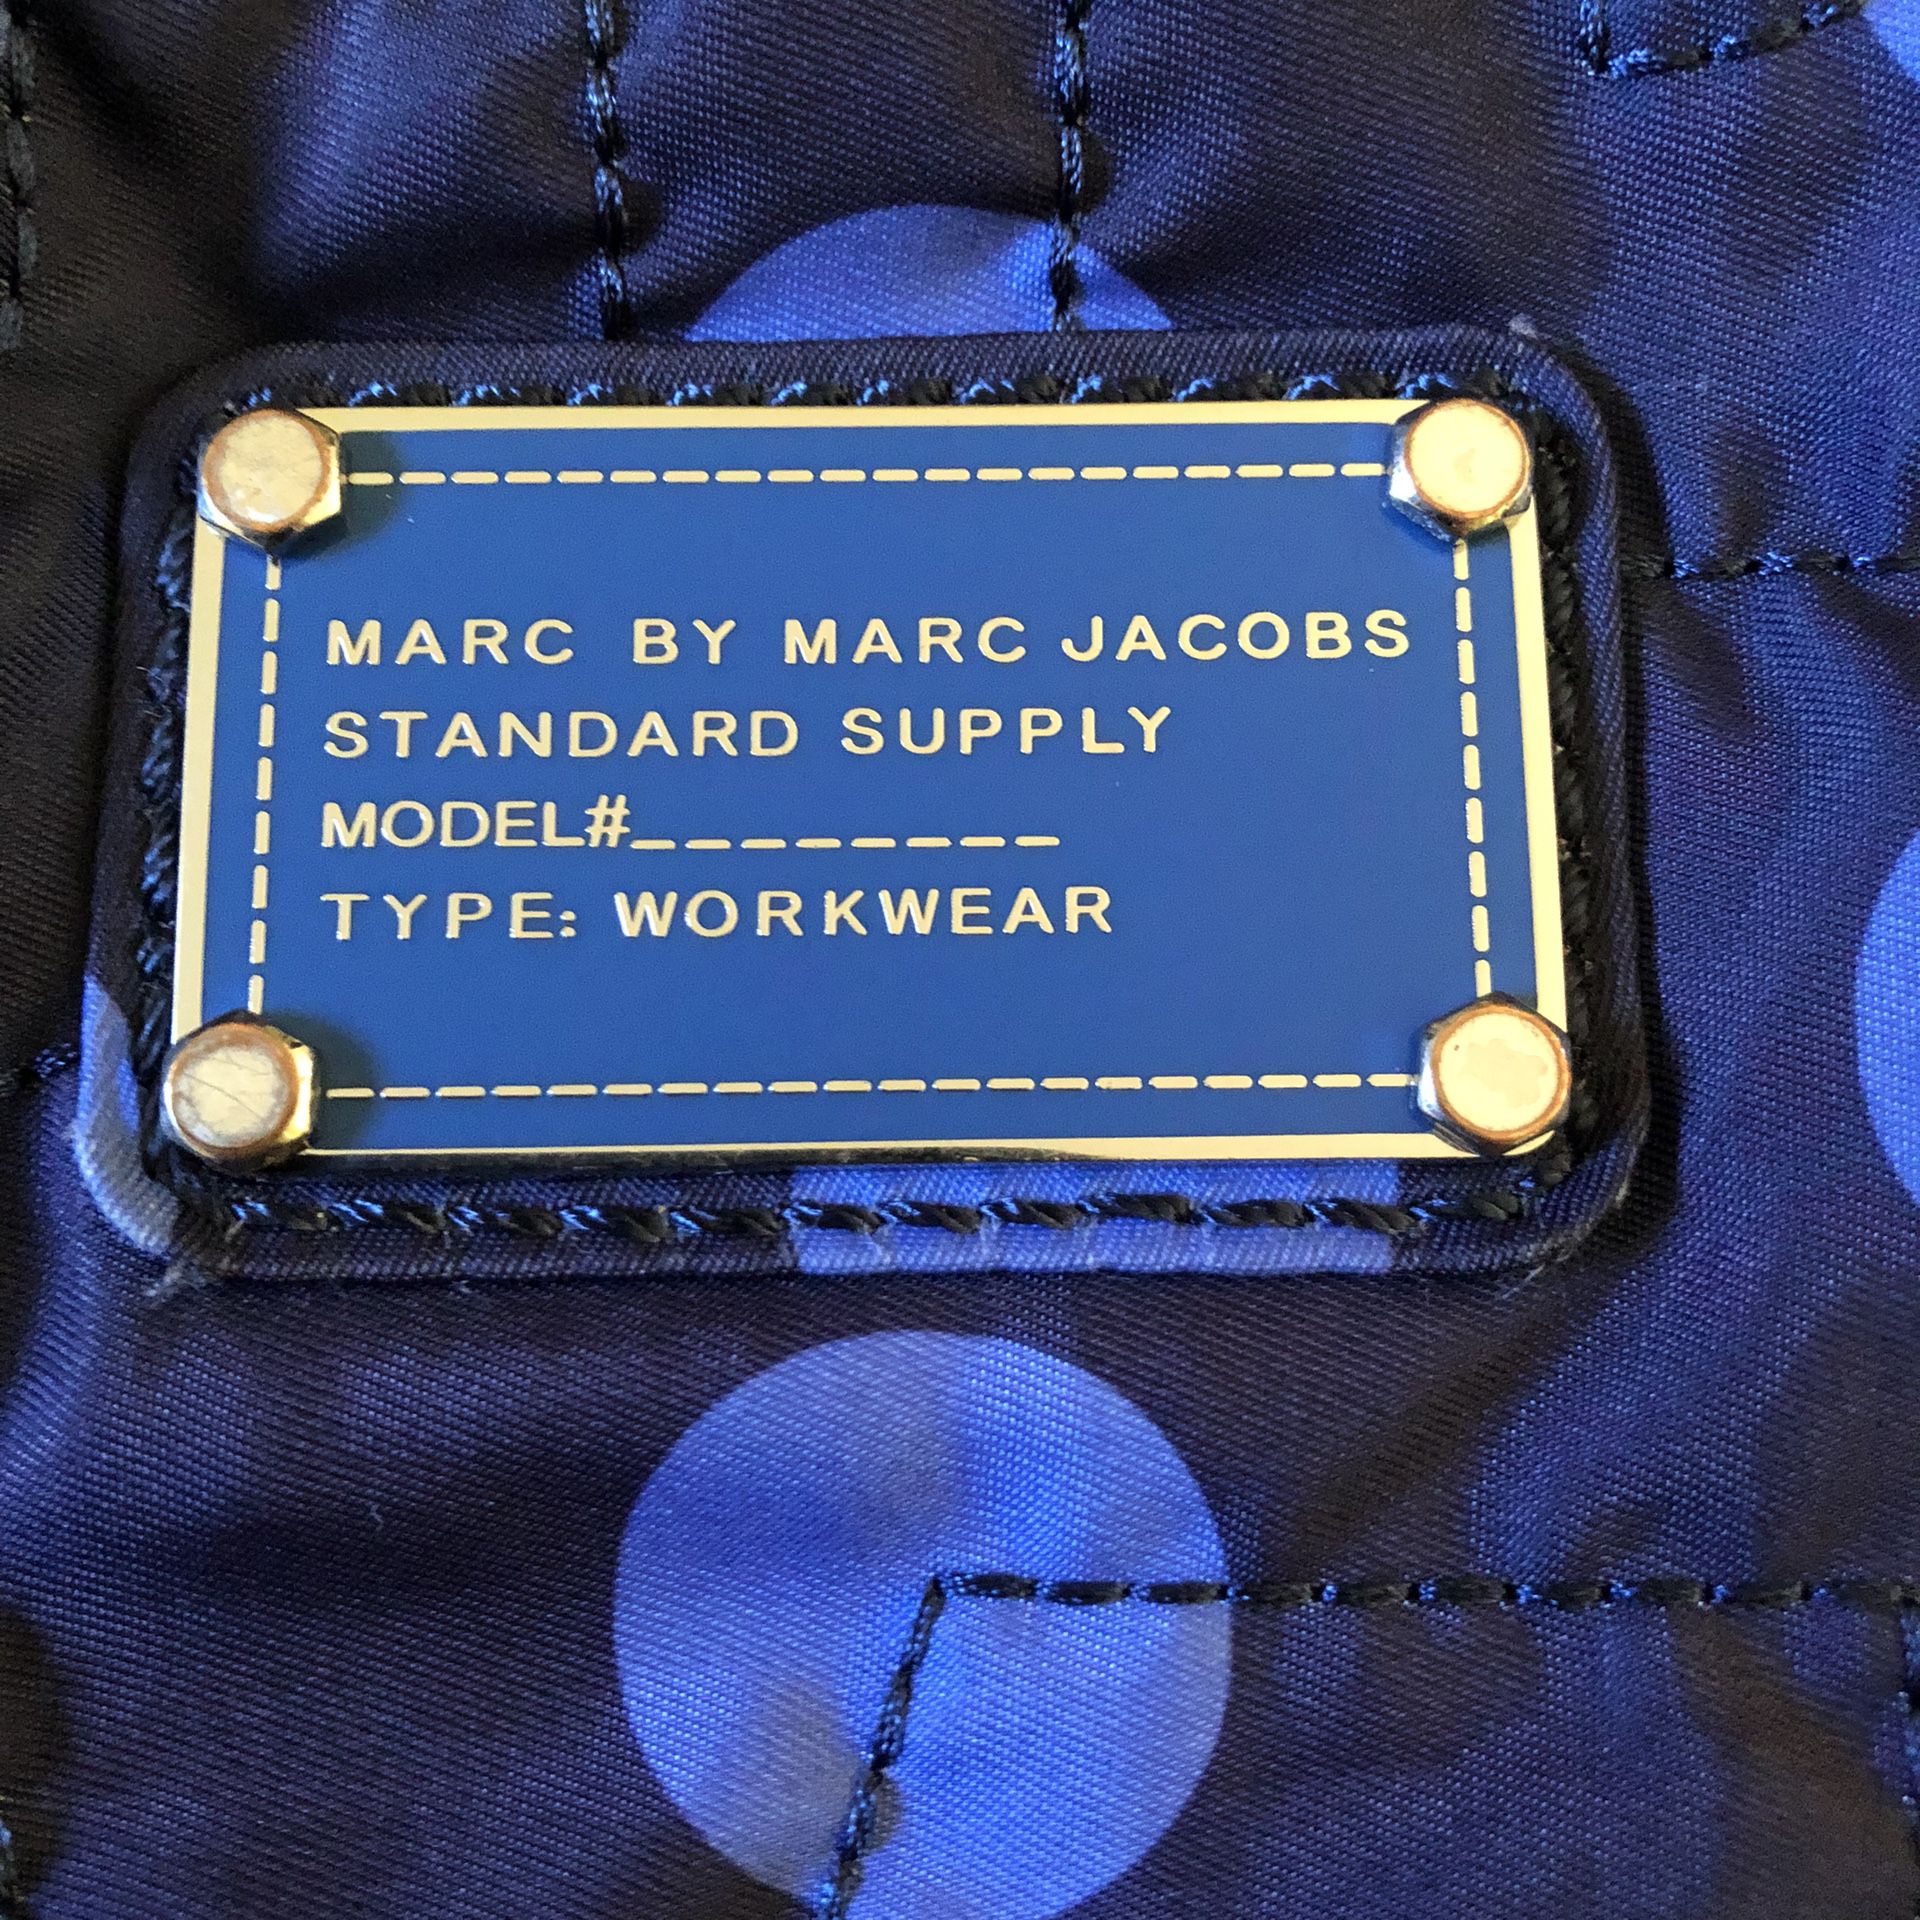 Marc by Marc jacobs nylon tote bag